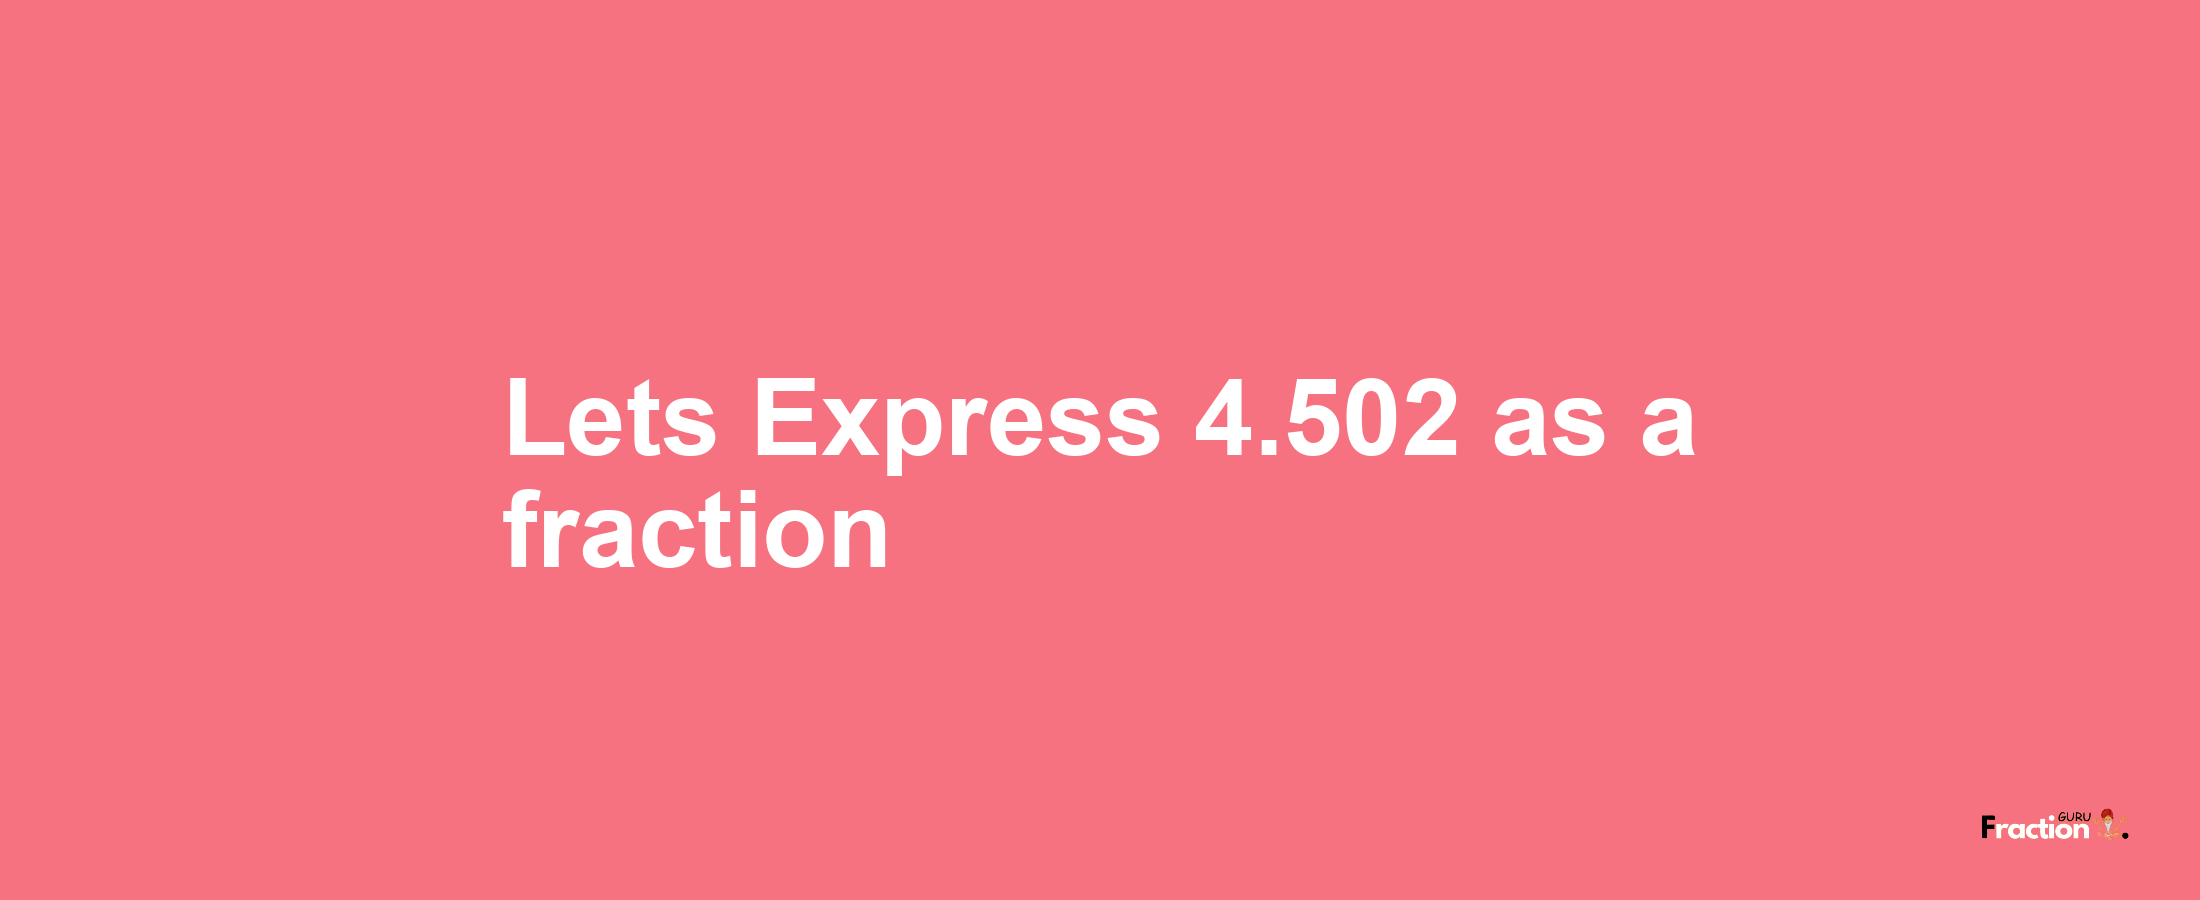 Lets Express 4.502 as afraction